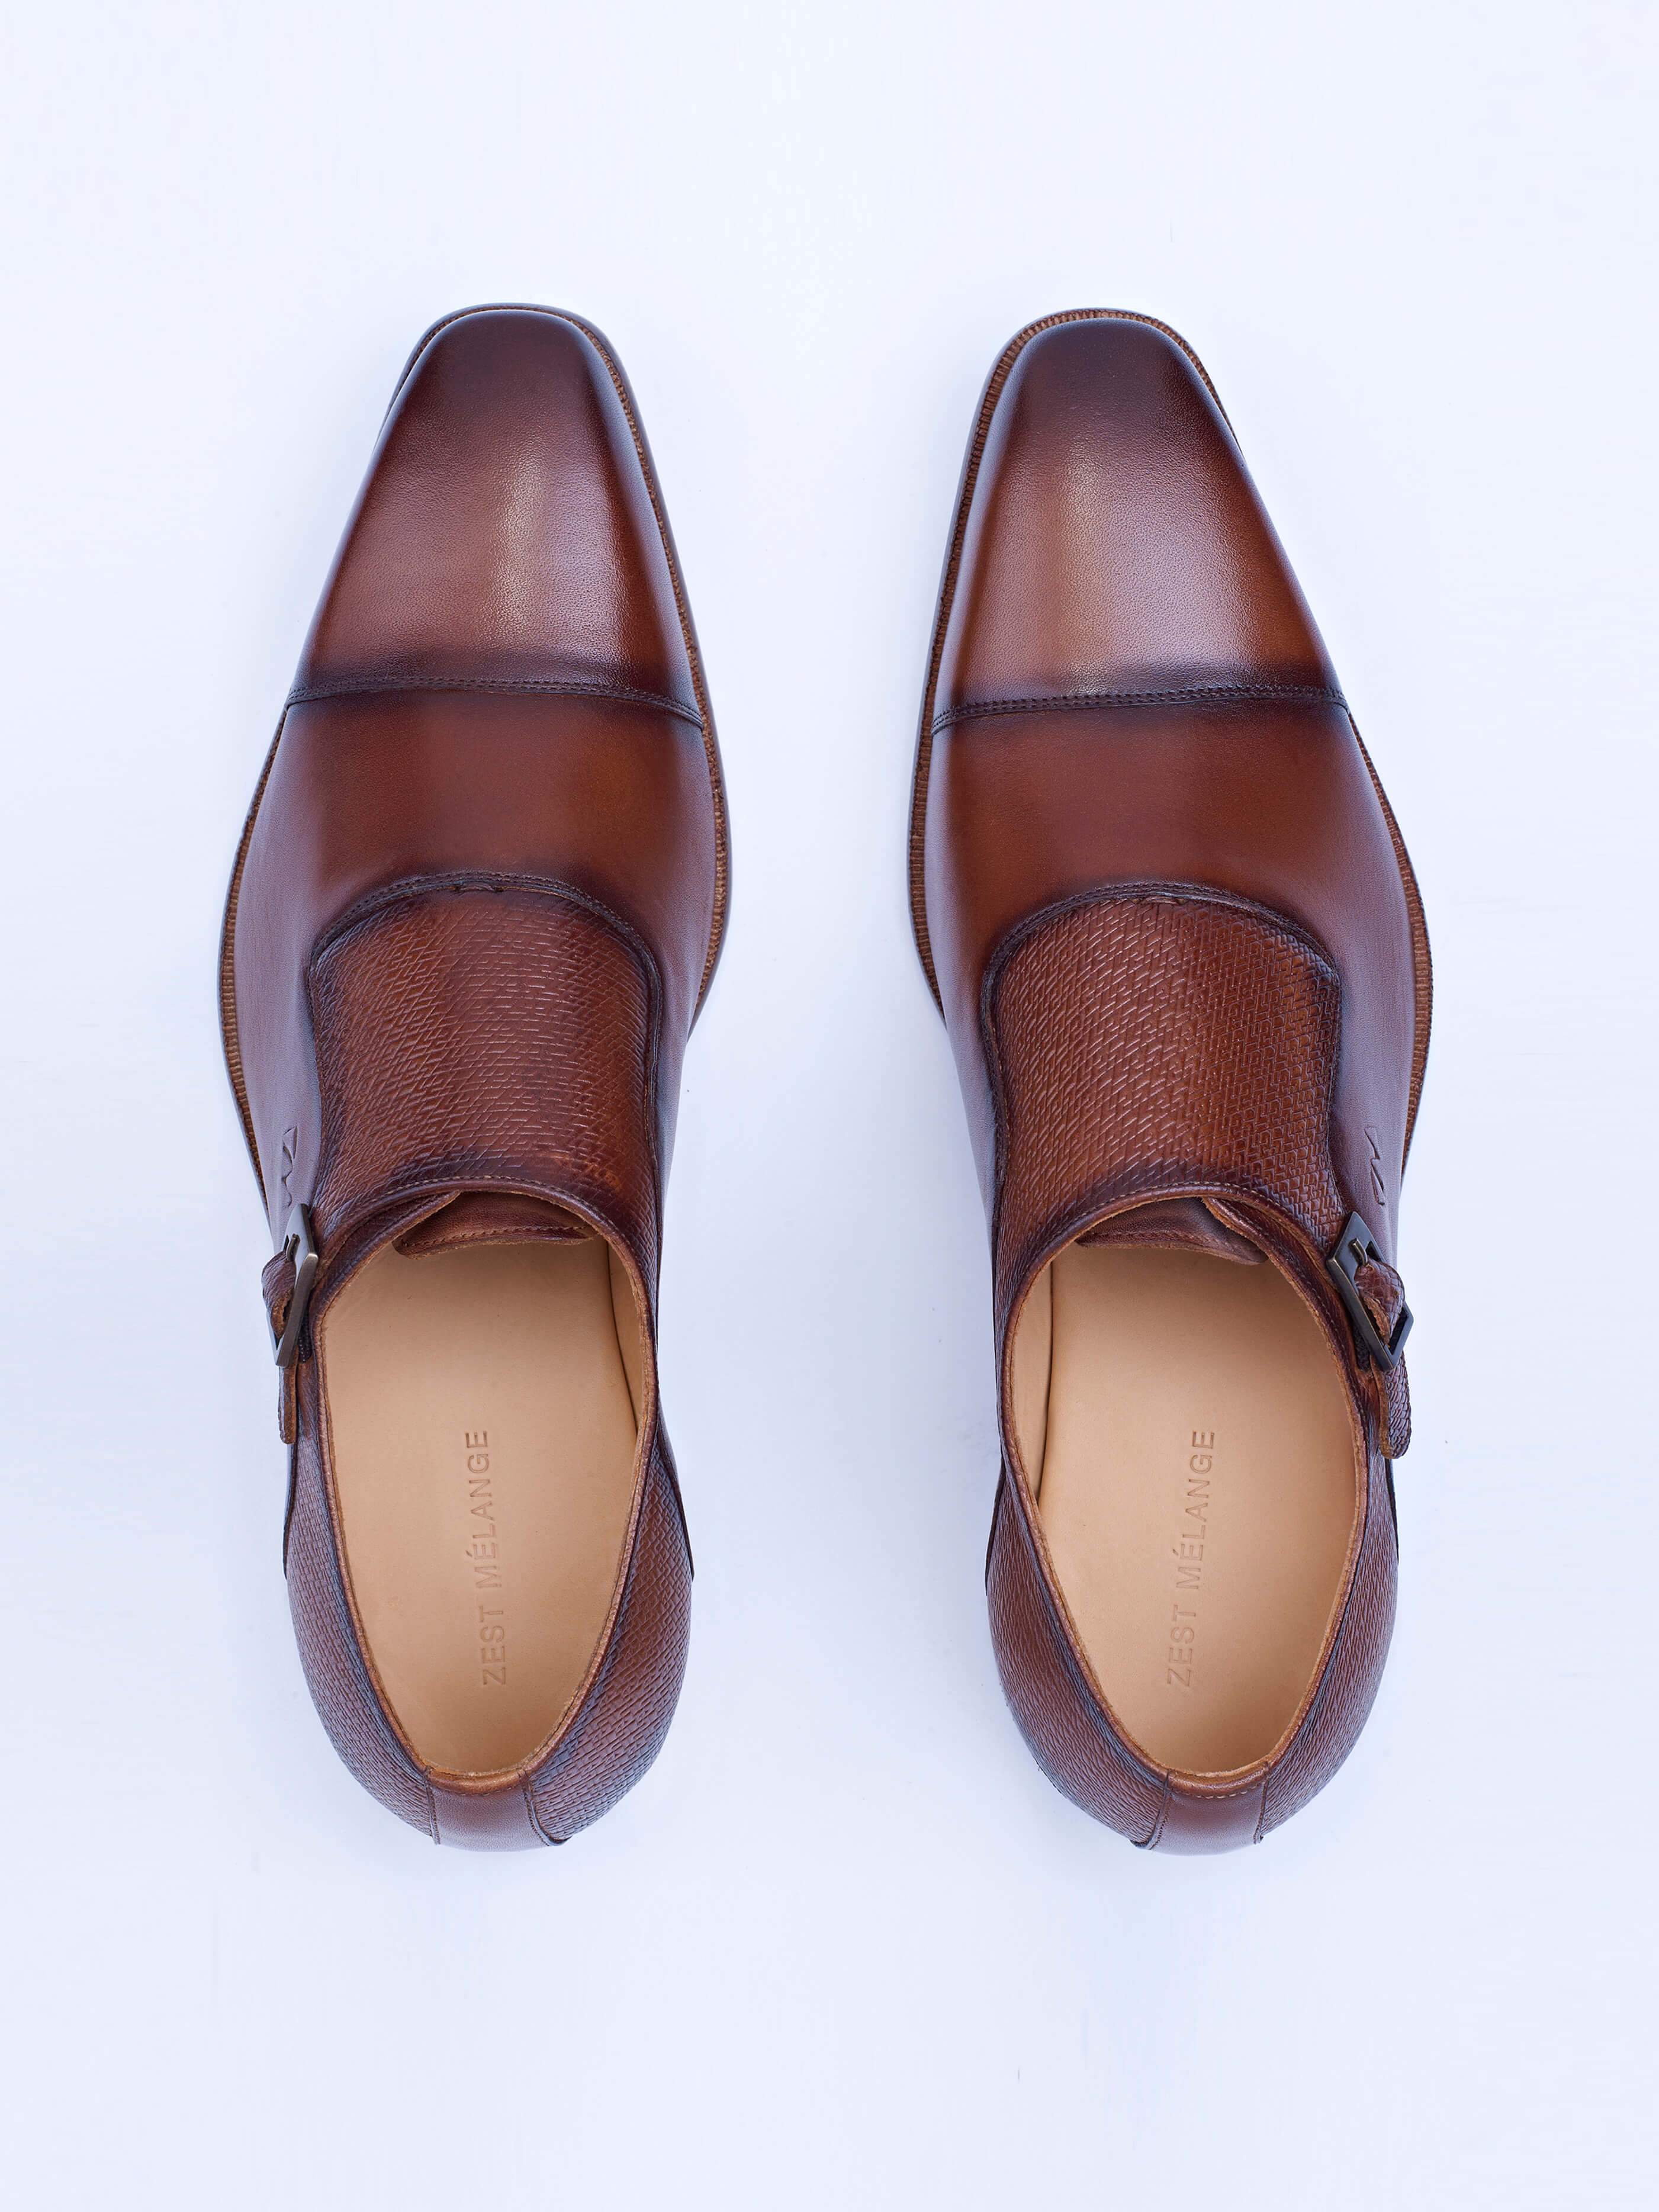 Single Buckle Monk Shoes With Zm Embossed Detail - Zest Mélange 